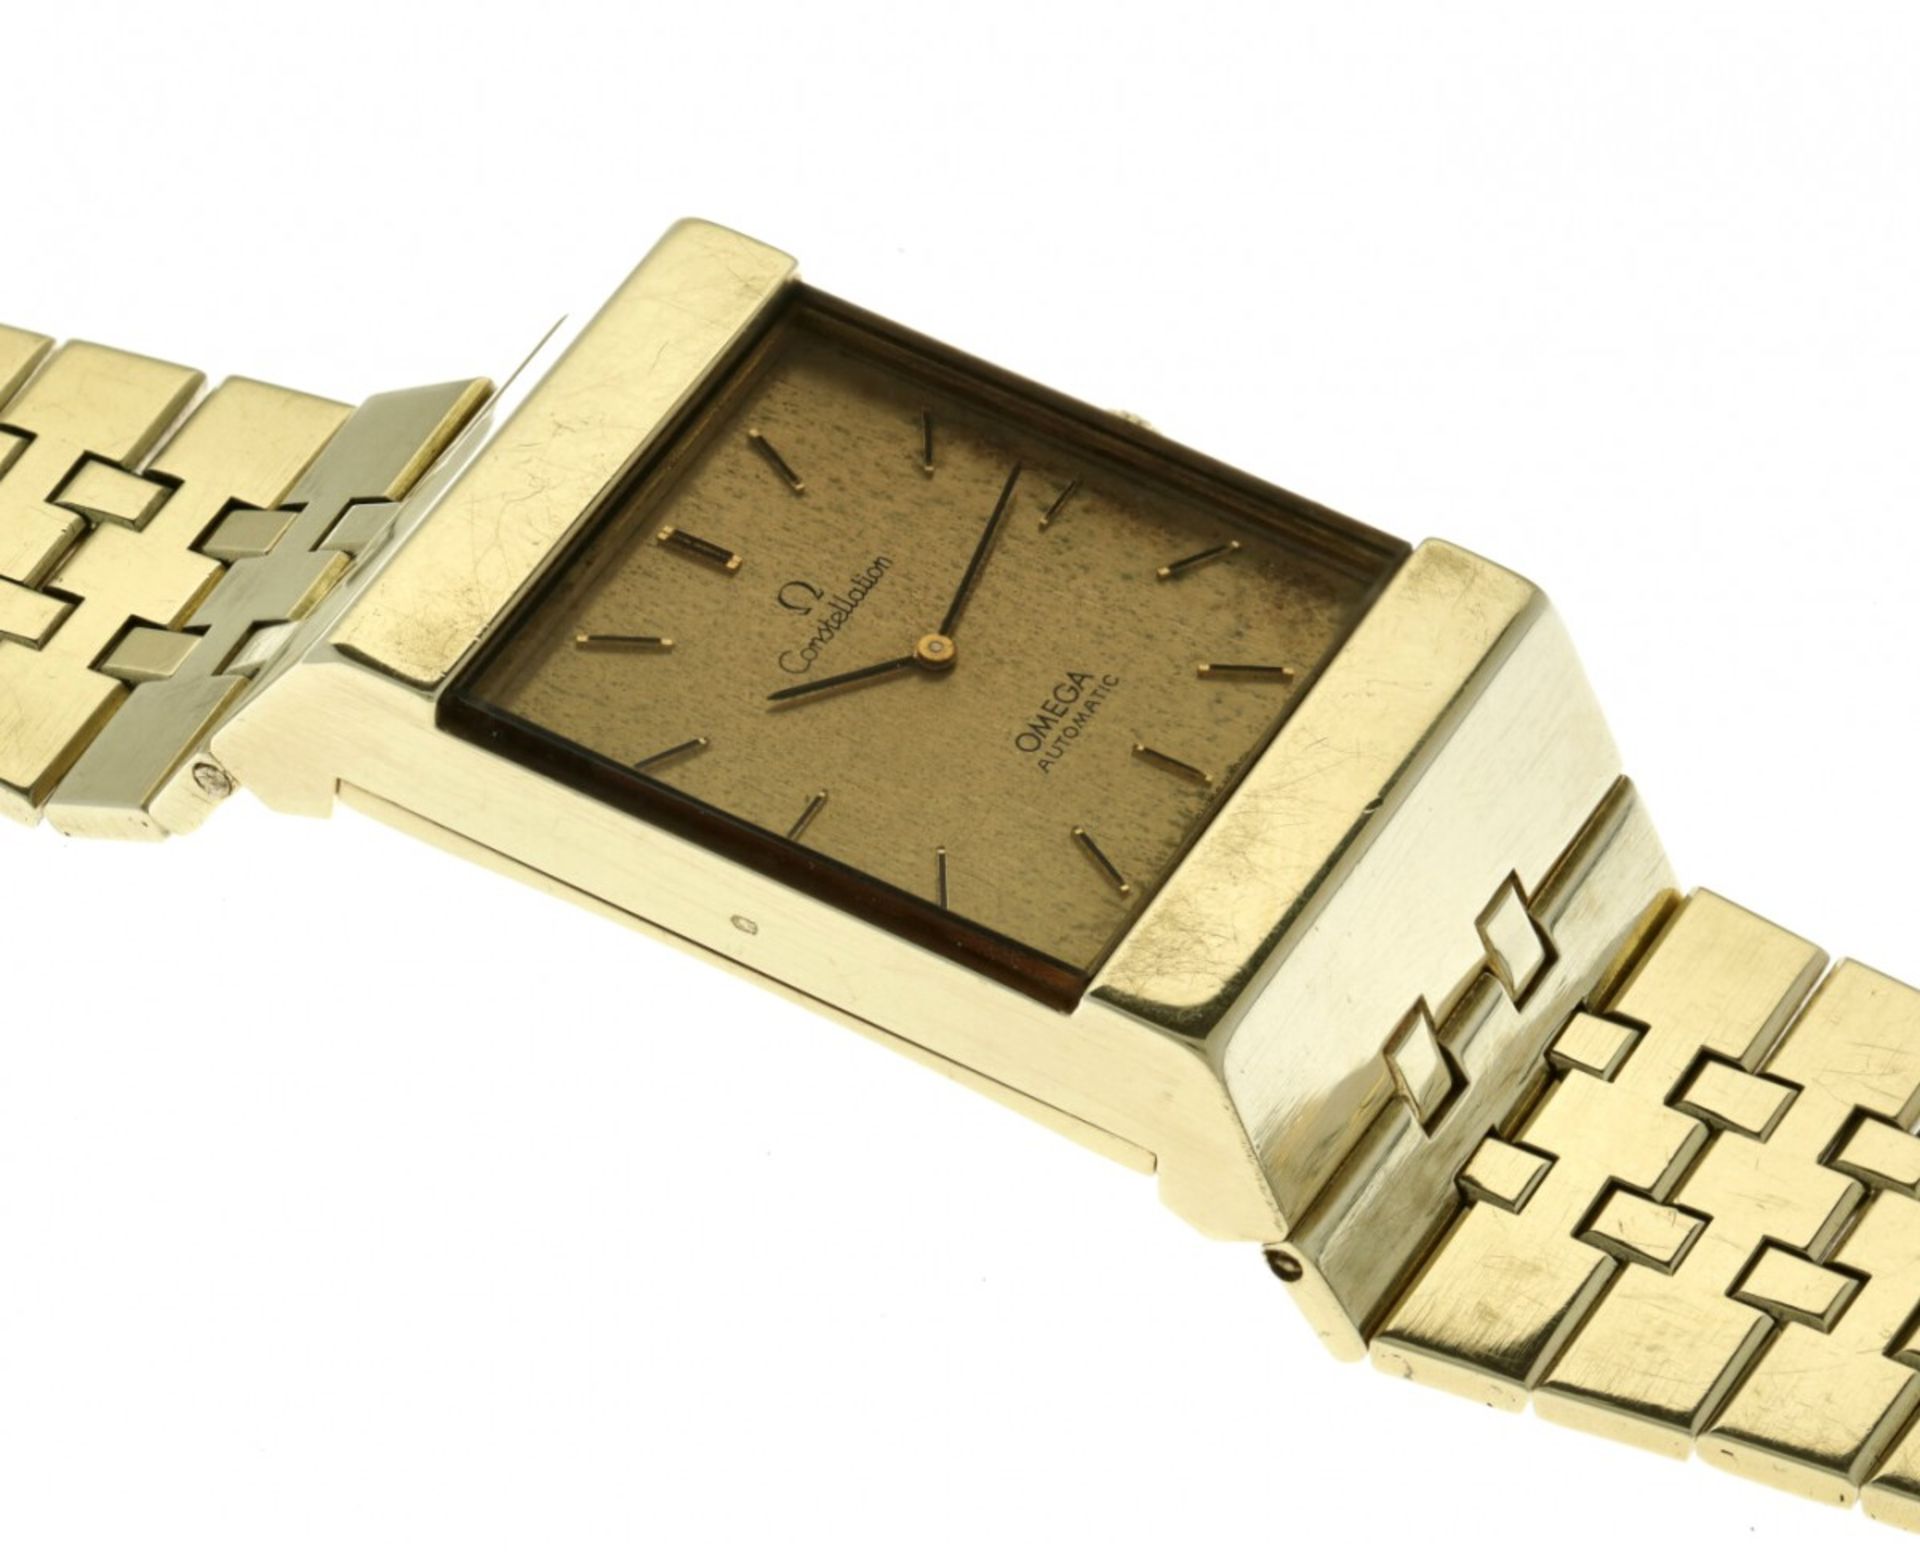 Omega Constellation 8359 - Men's Watch - approx. 1972 - Image 6 of 9